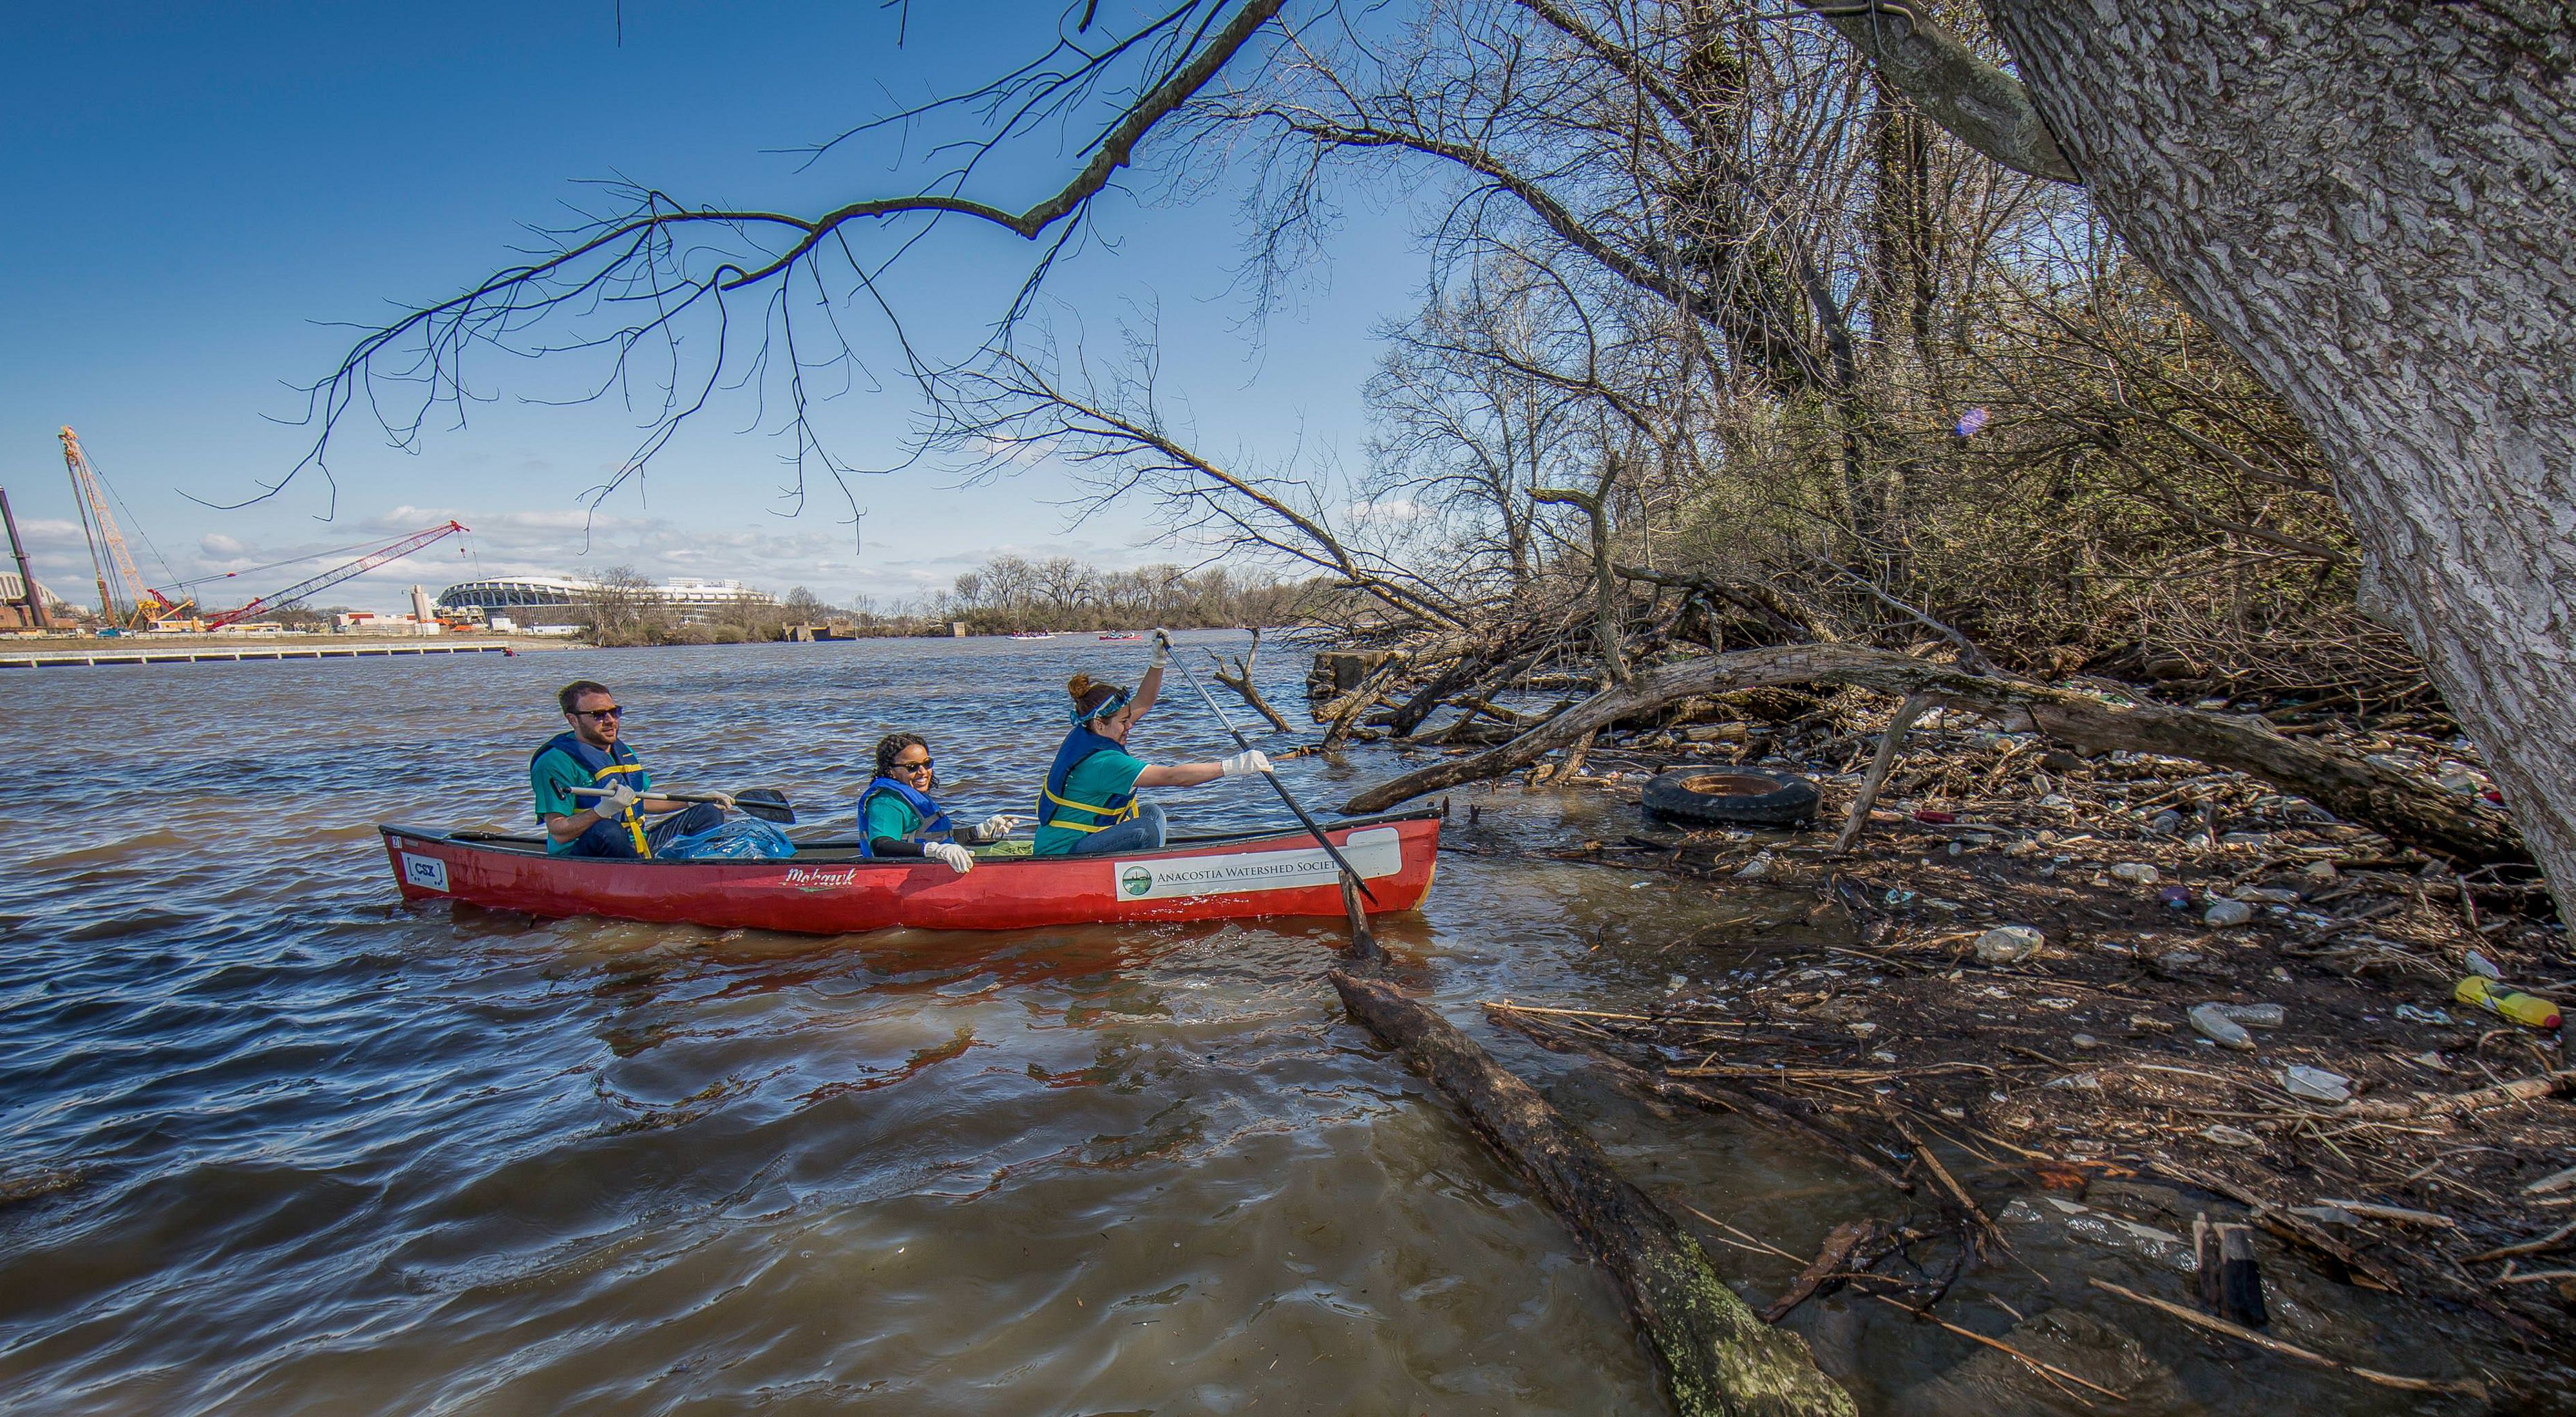 Three people navigate a canoe close to the shore of the Anacostia River to pick up trash in the tangled roots of the trees during a volunteer event.